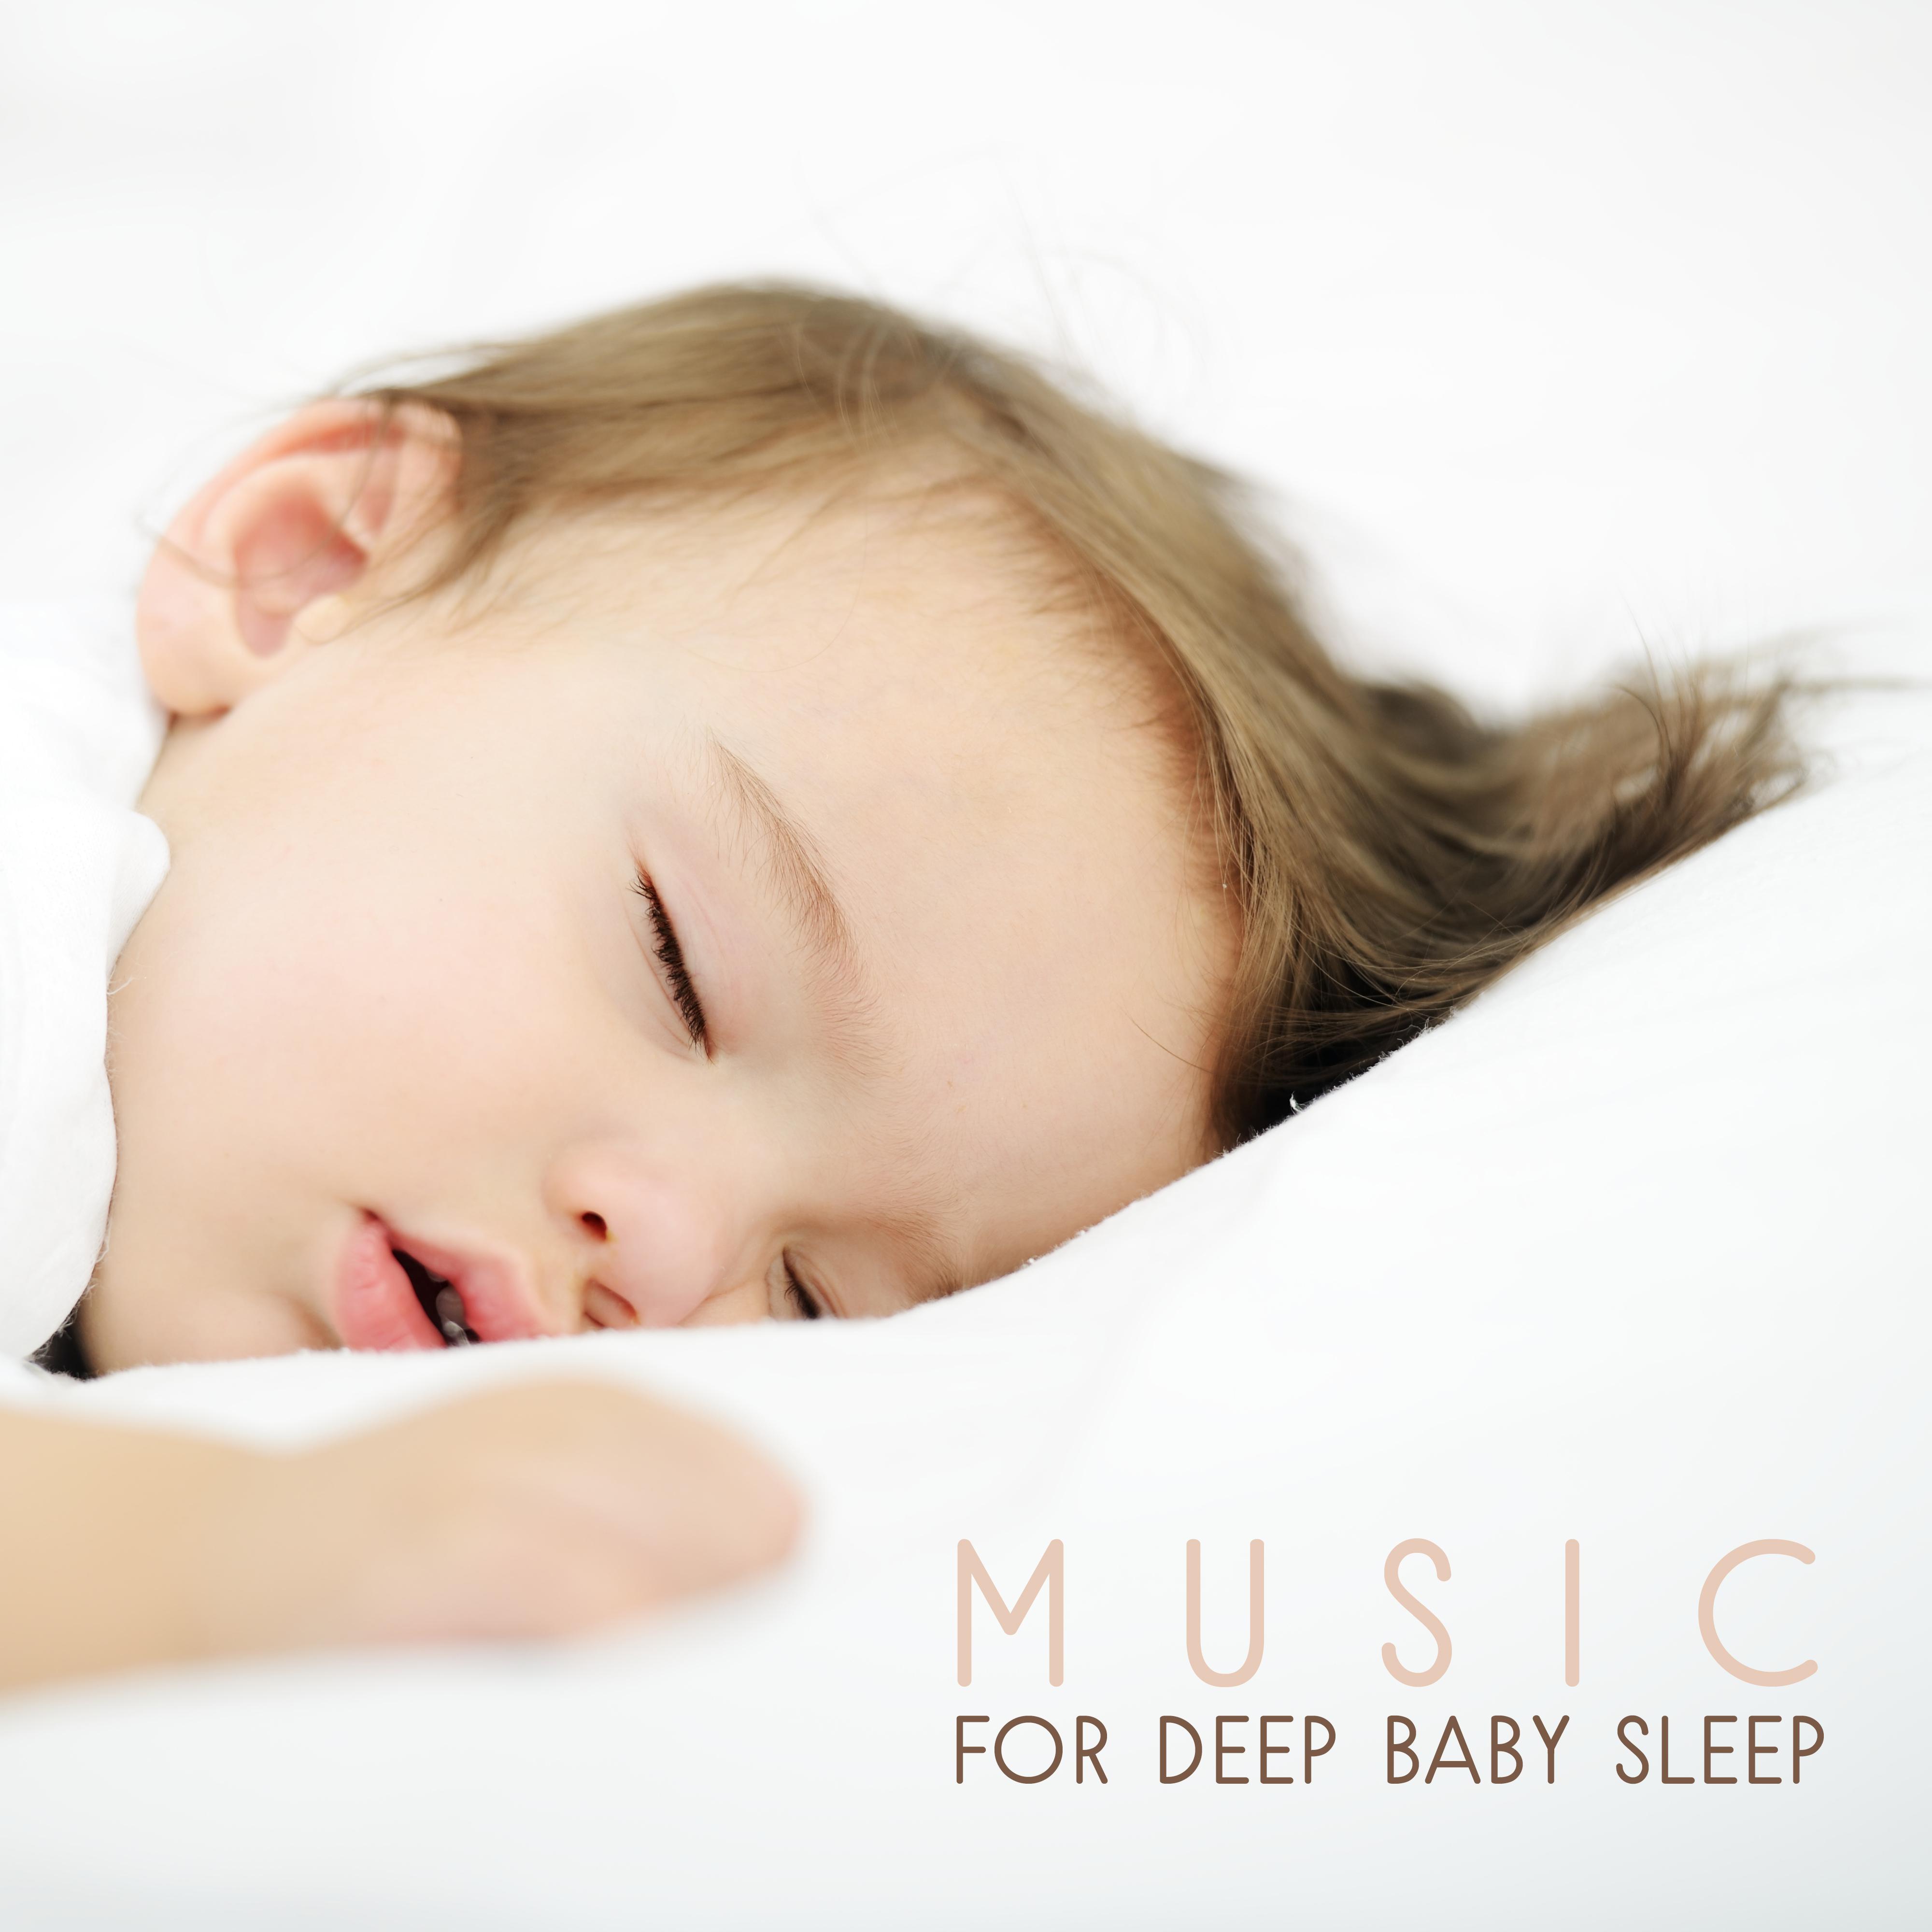 Music for Deep Baby Sleep – Easy Listening, Stress Relief, Peaceful Waves, Calm Night, Baby Lullabies